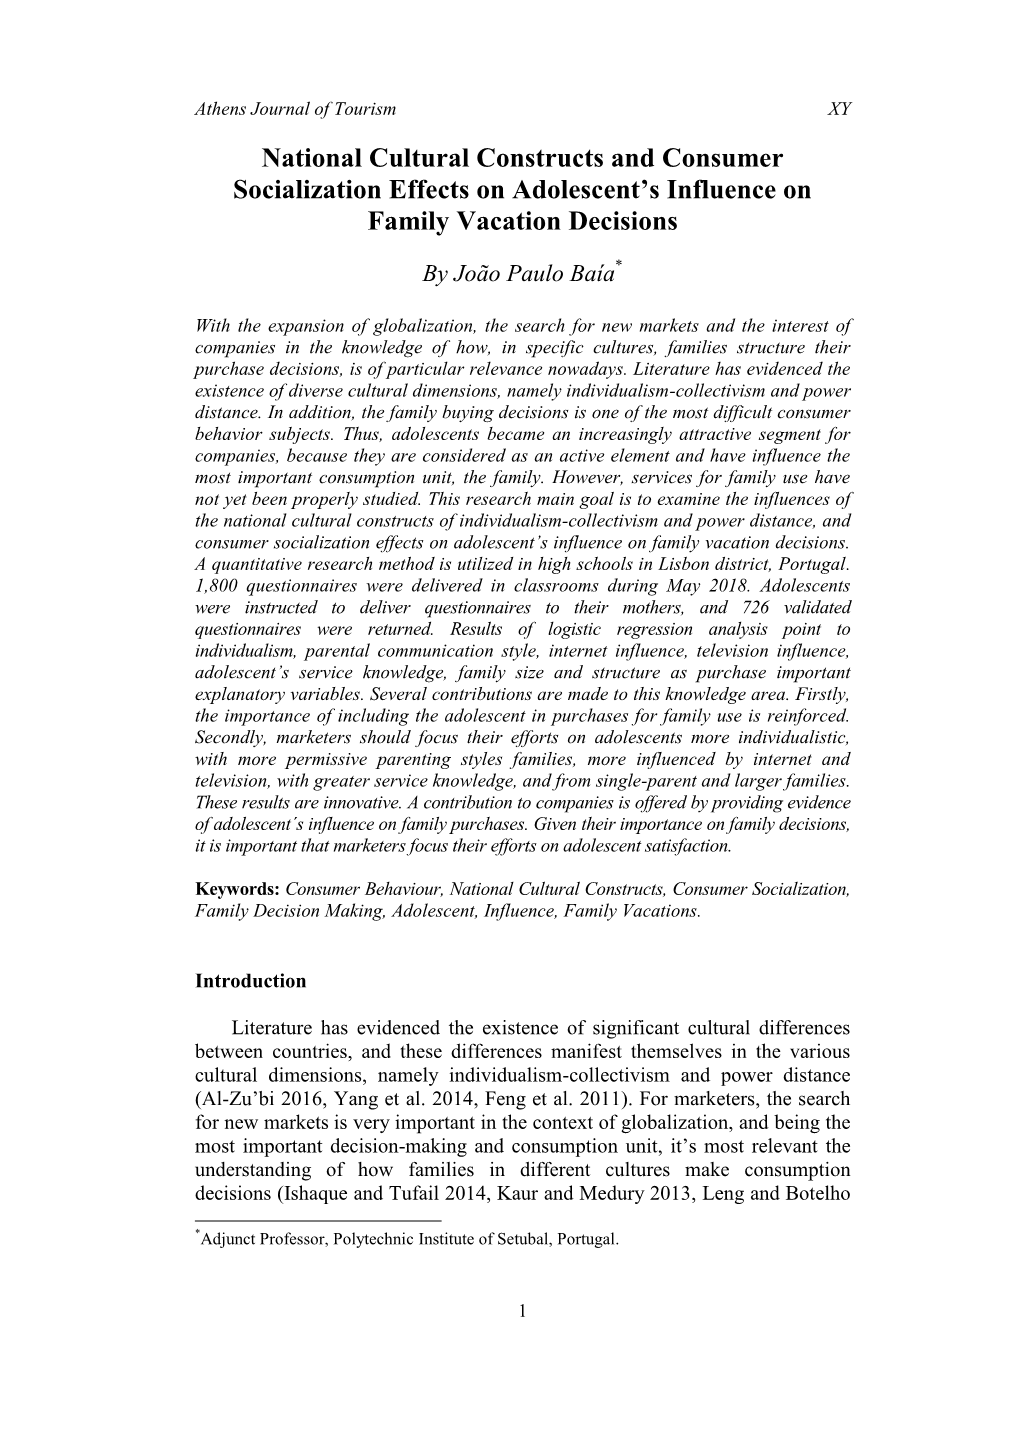 National Cultural Constructs and Consumer Socialization Effects on Adolescent’S Influence on Family Vacation Decisions